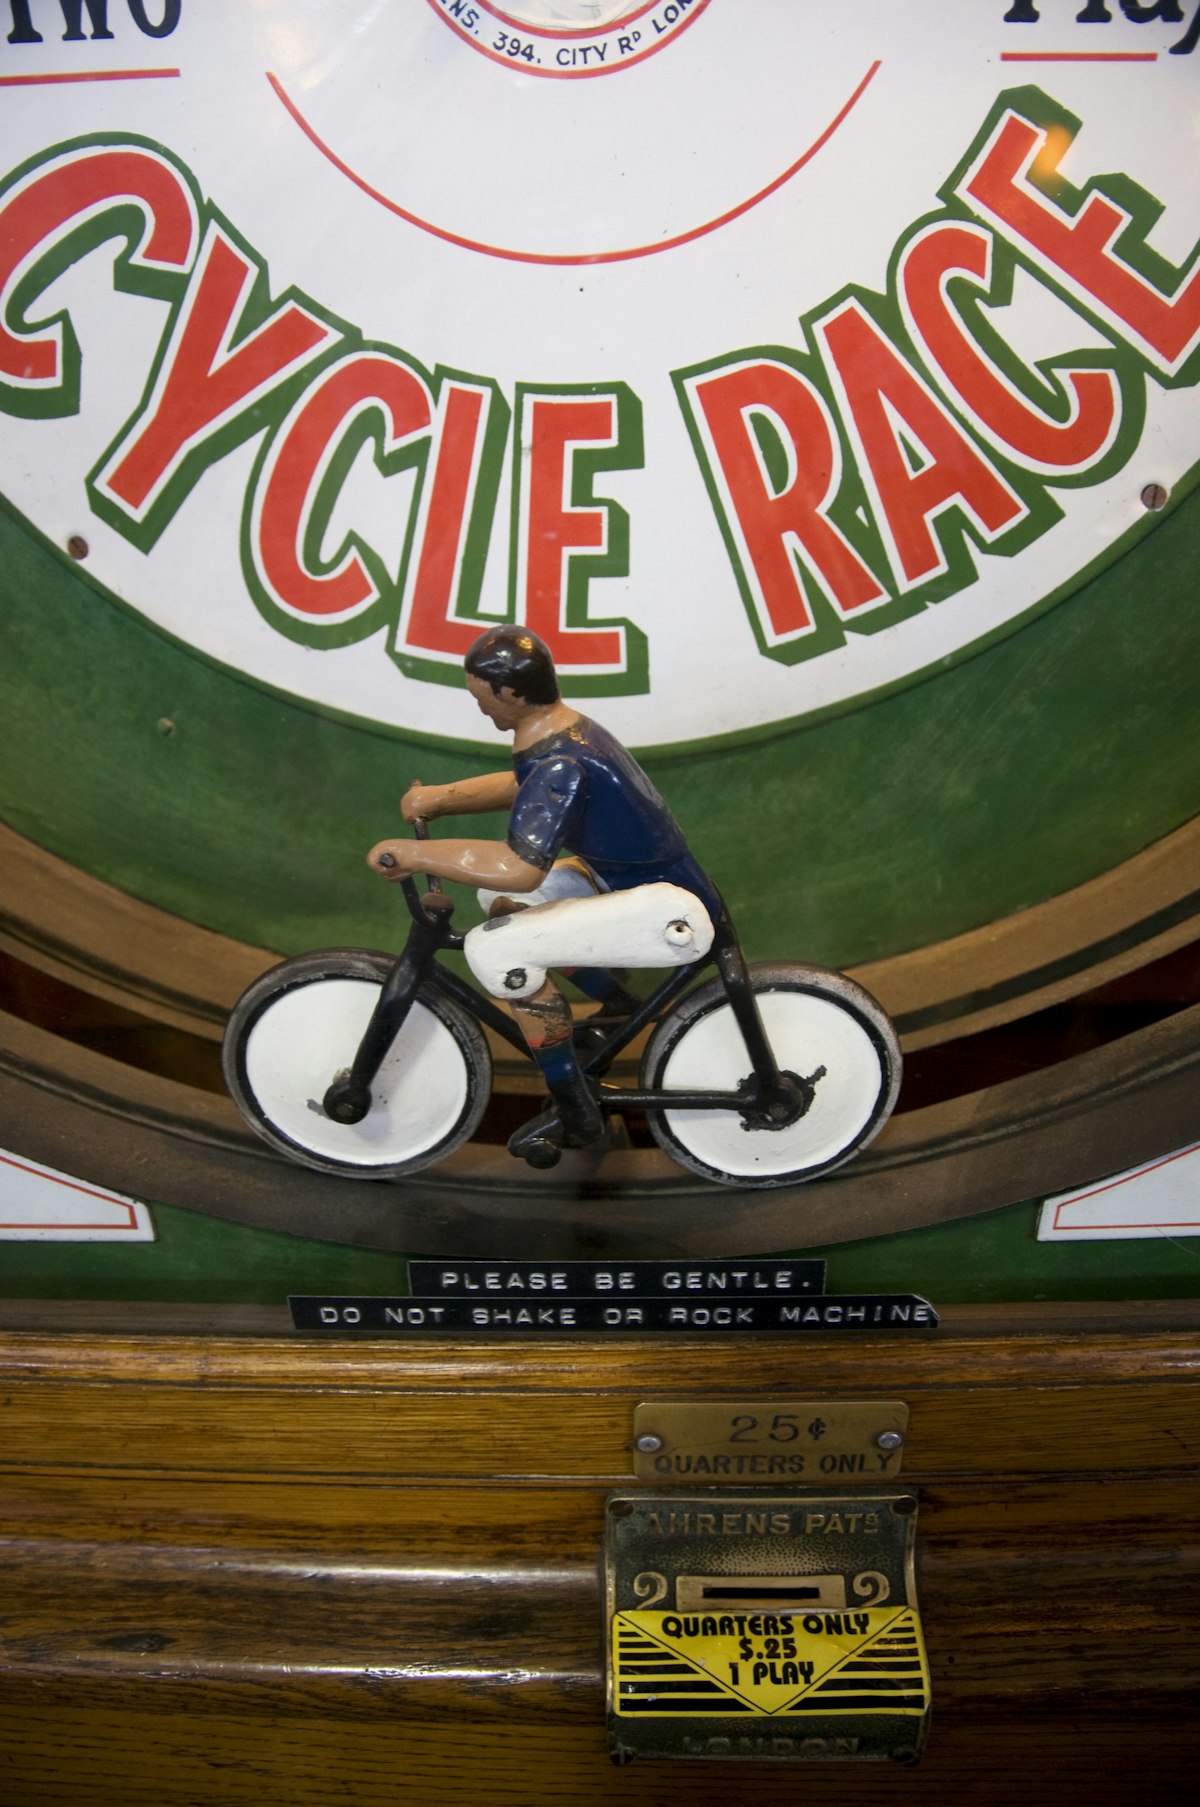 Cycle race at Musee Mecanique, housing collections of mechanically operated musical instruments and antique arcade machines.